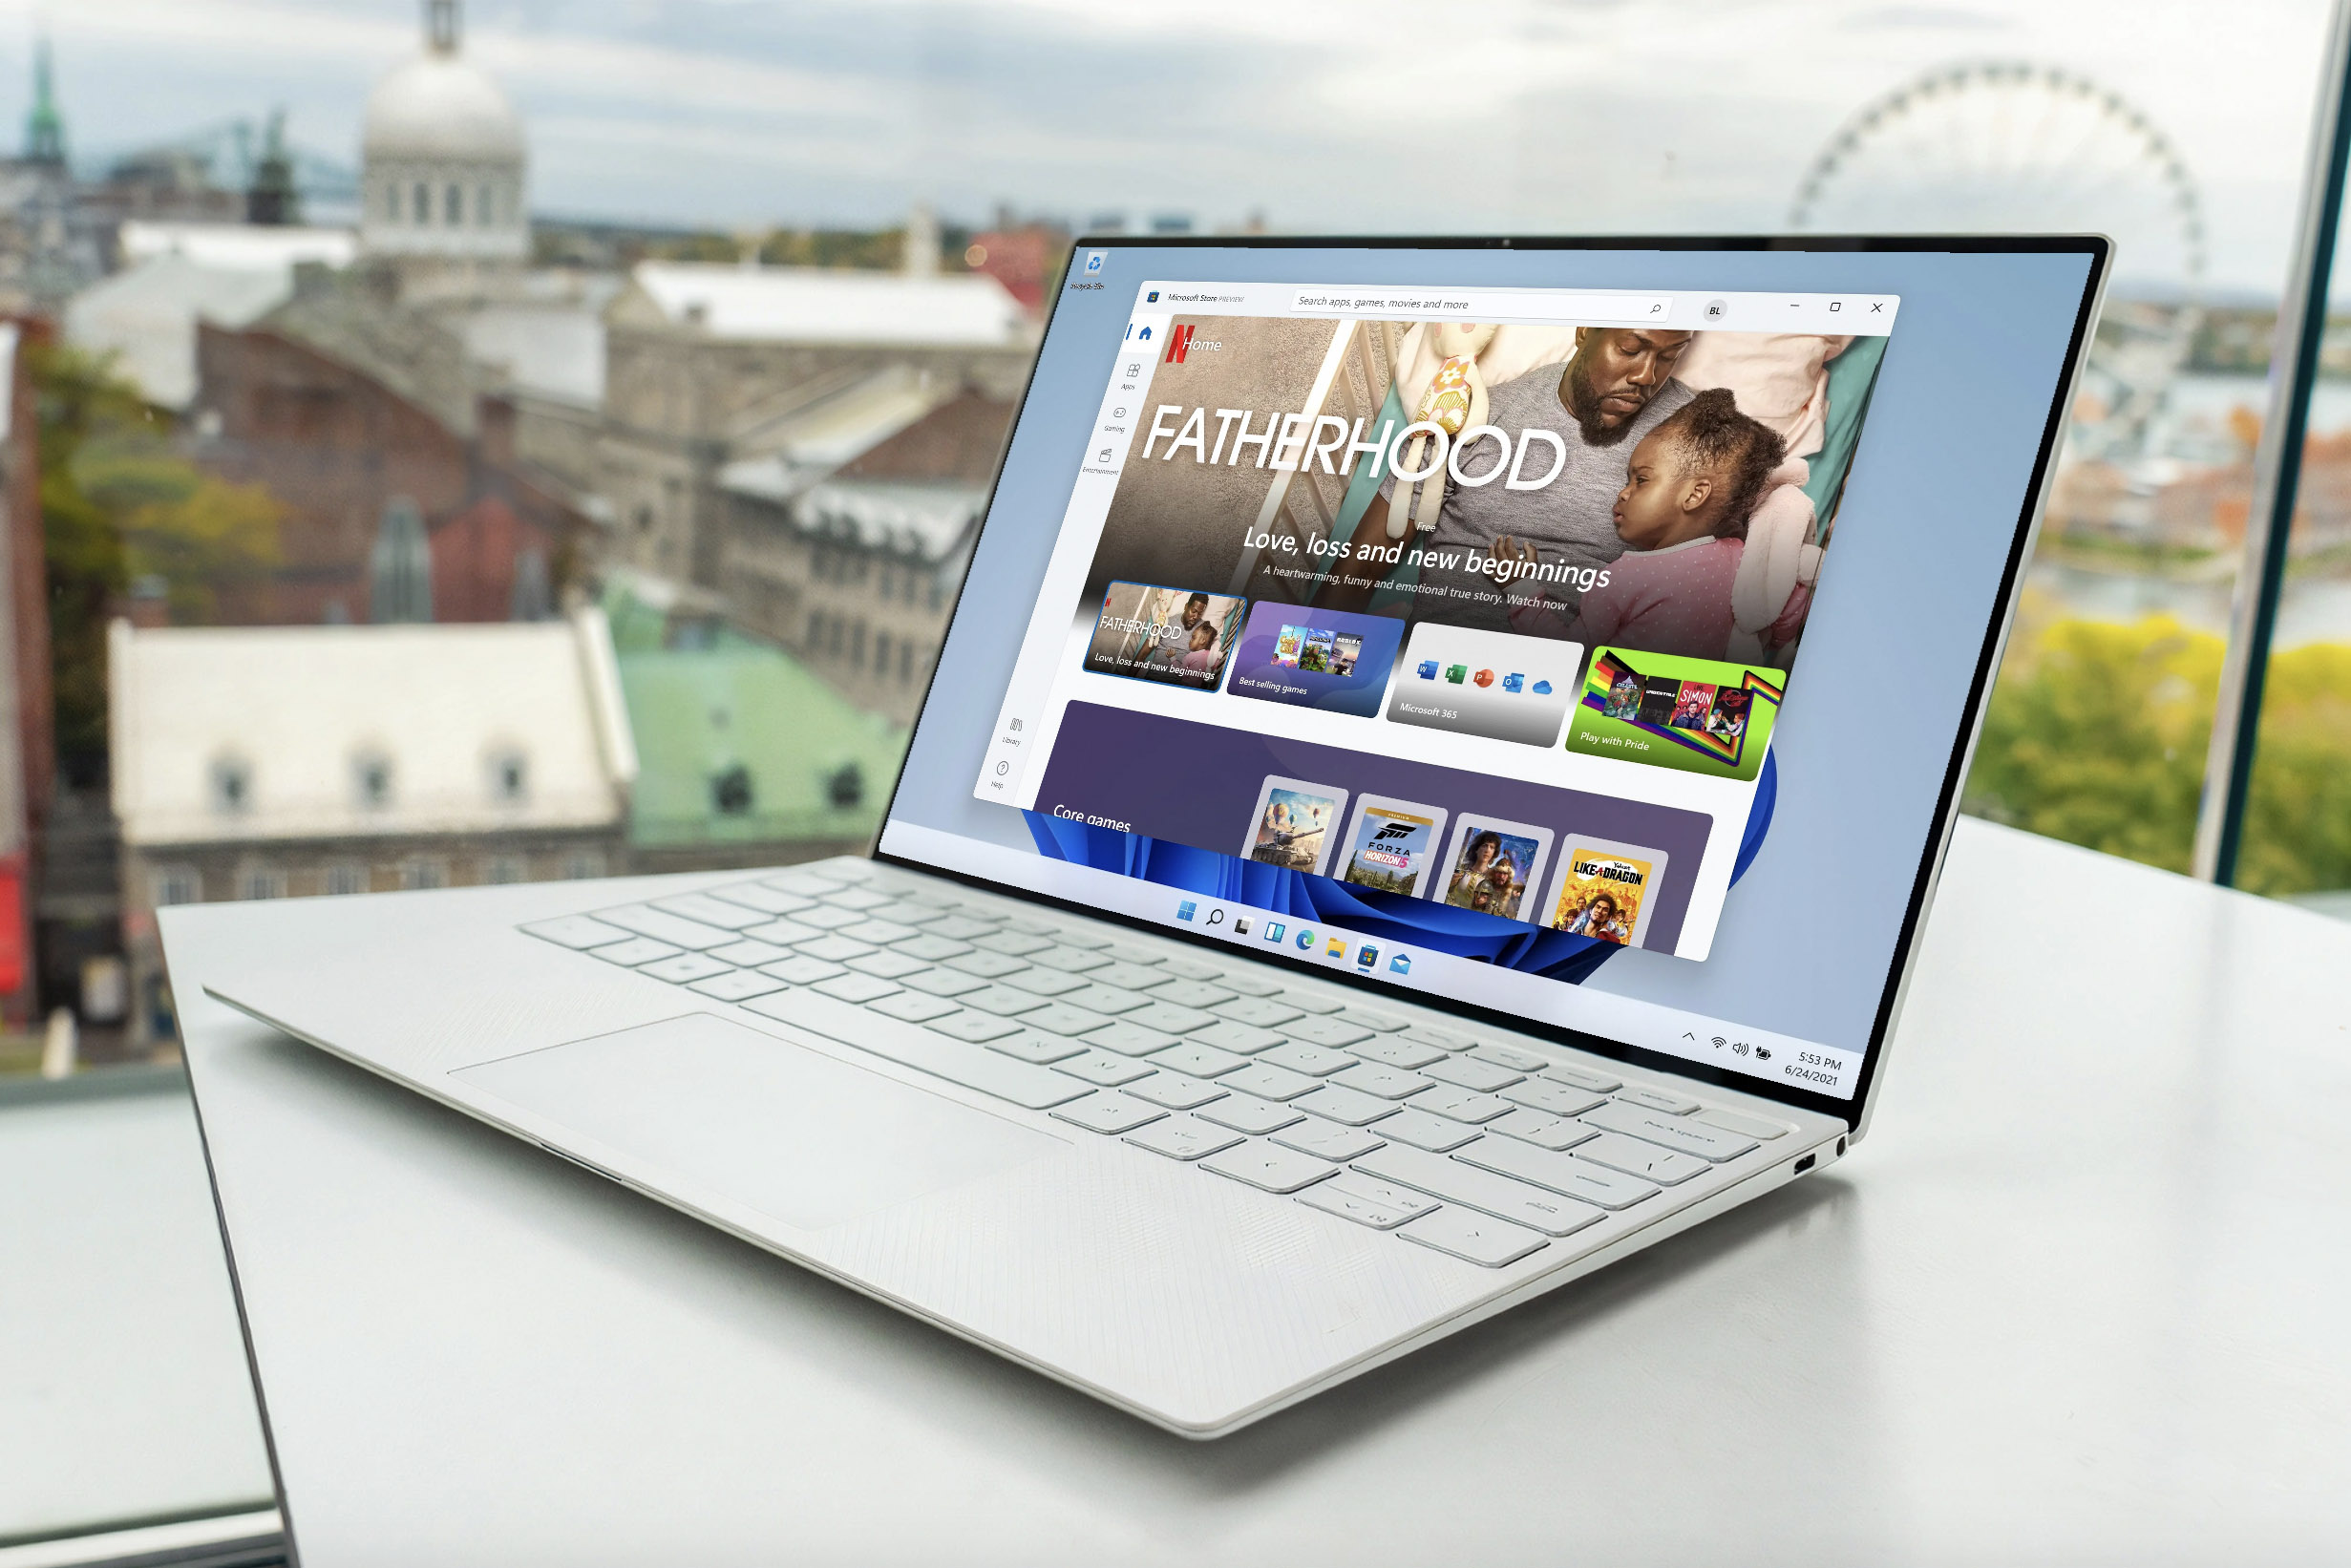 Microsoft Store: Most Up-to-Date Encyclopedia, News & Reviews